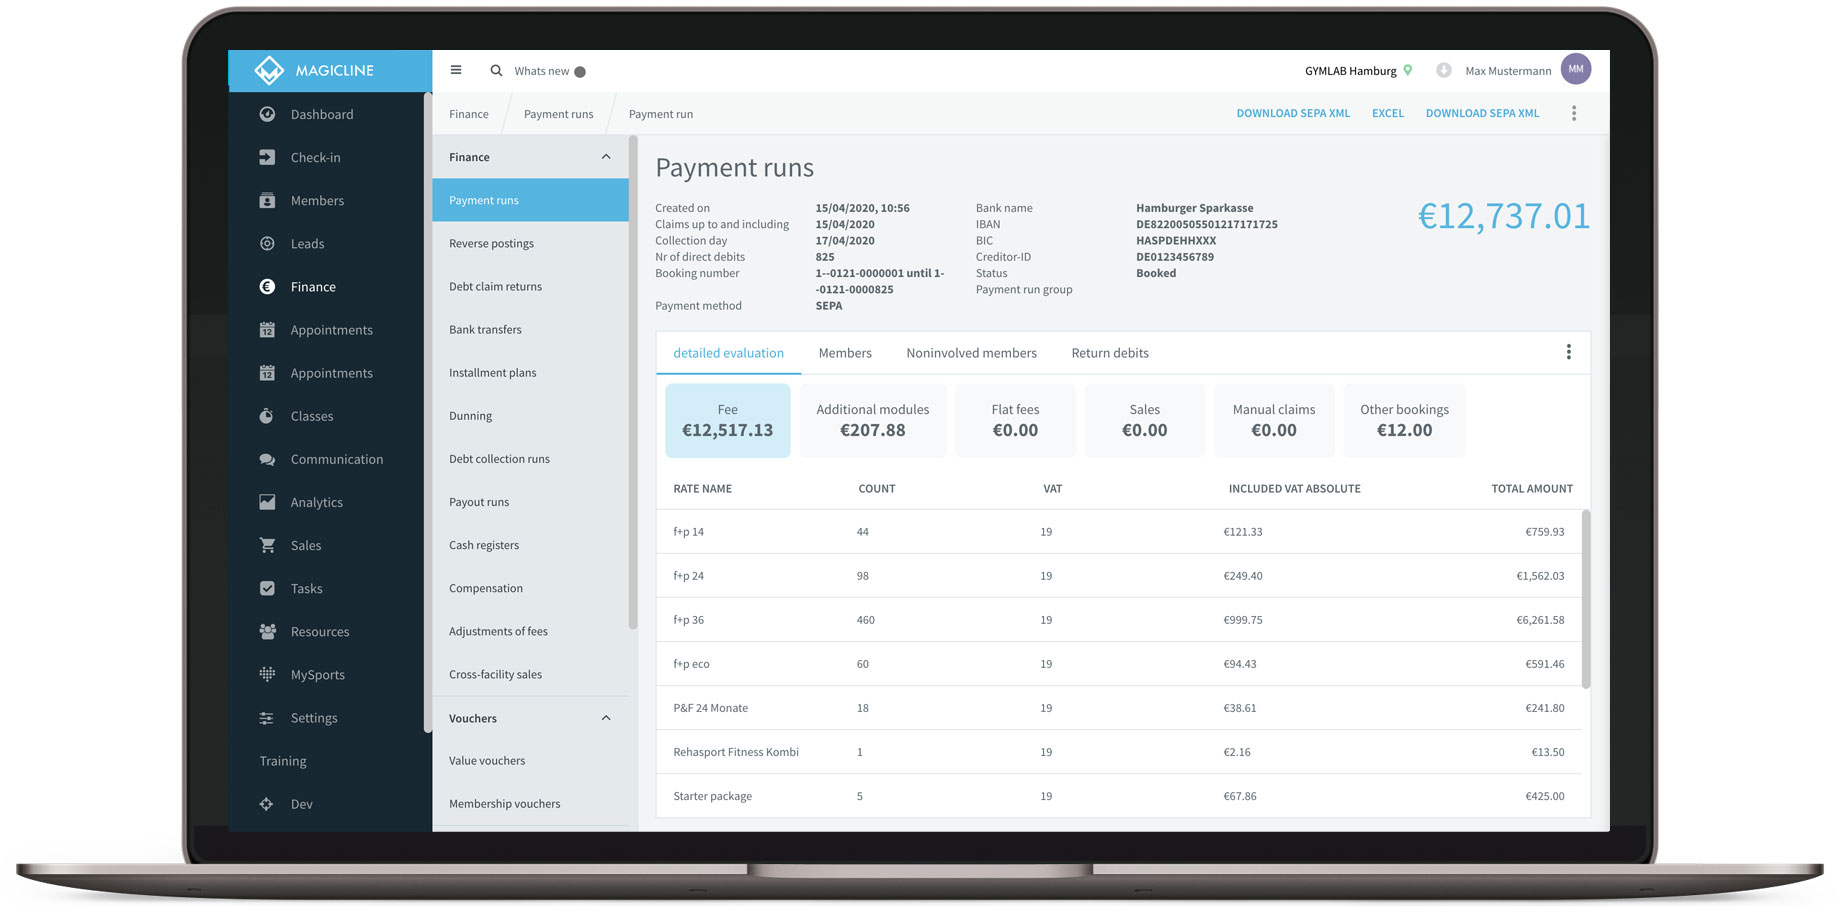 Manage your membership fees, payment runs and the dunning process via Magicline. With our software you are able to configure dunning levels and automatic communication processes to make sure your members pay their dues.